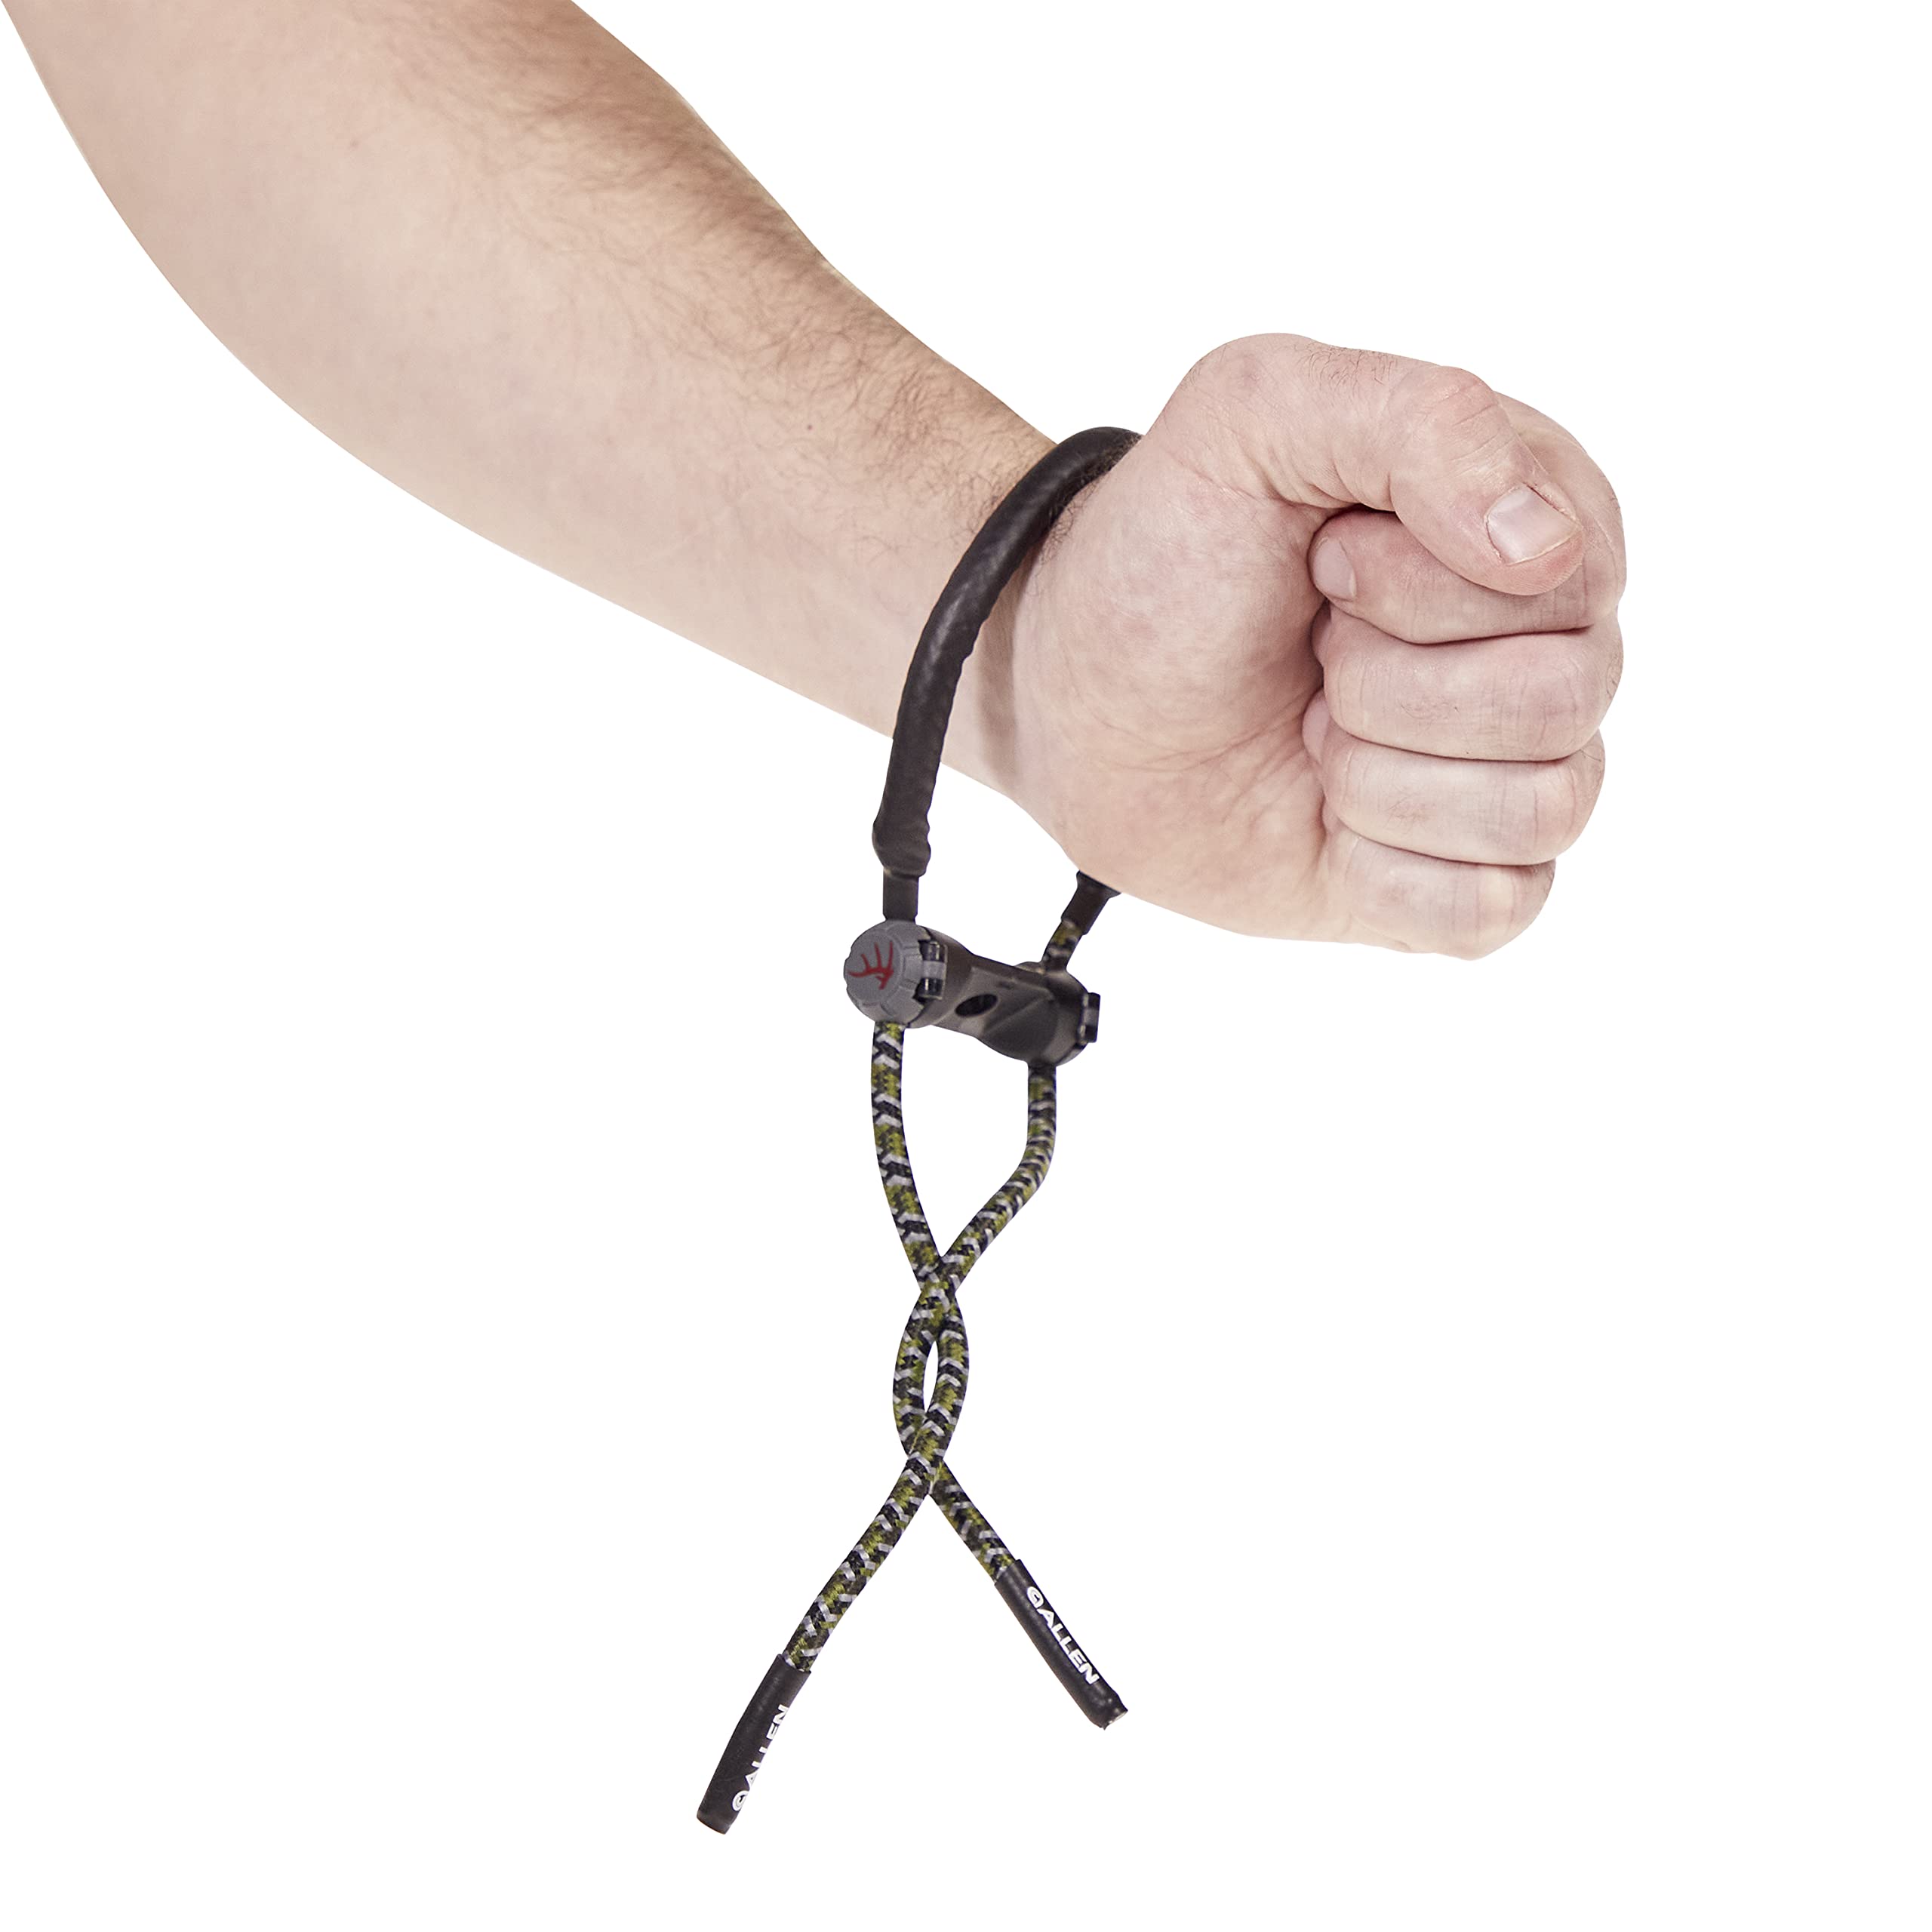 Allen Company Main Beam Archery Wrist Bow Sling (Camouflage) Adjustable $2.59 + Free Shipping w/ Prime or on $35+